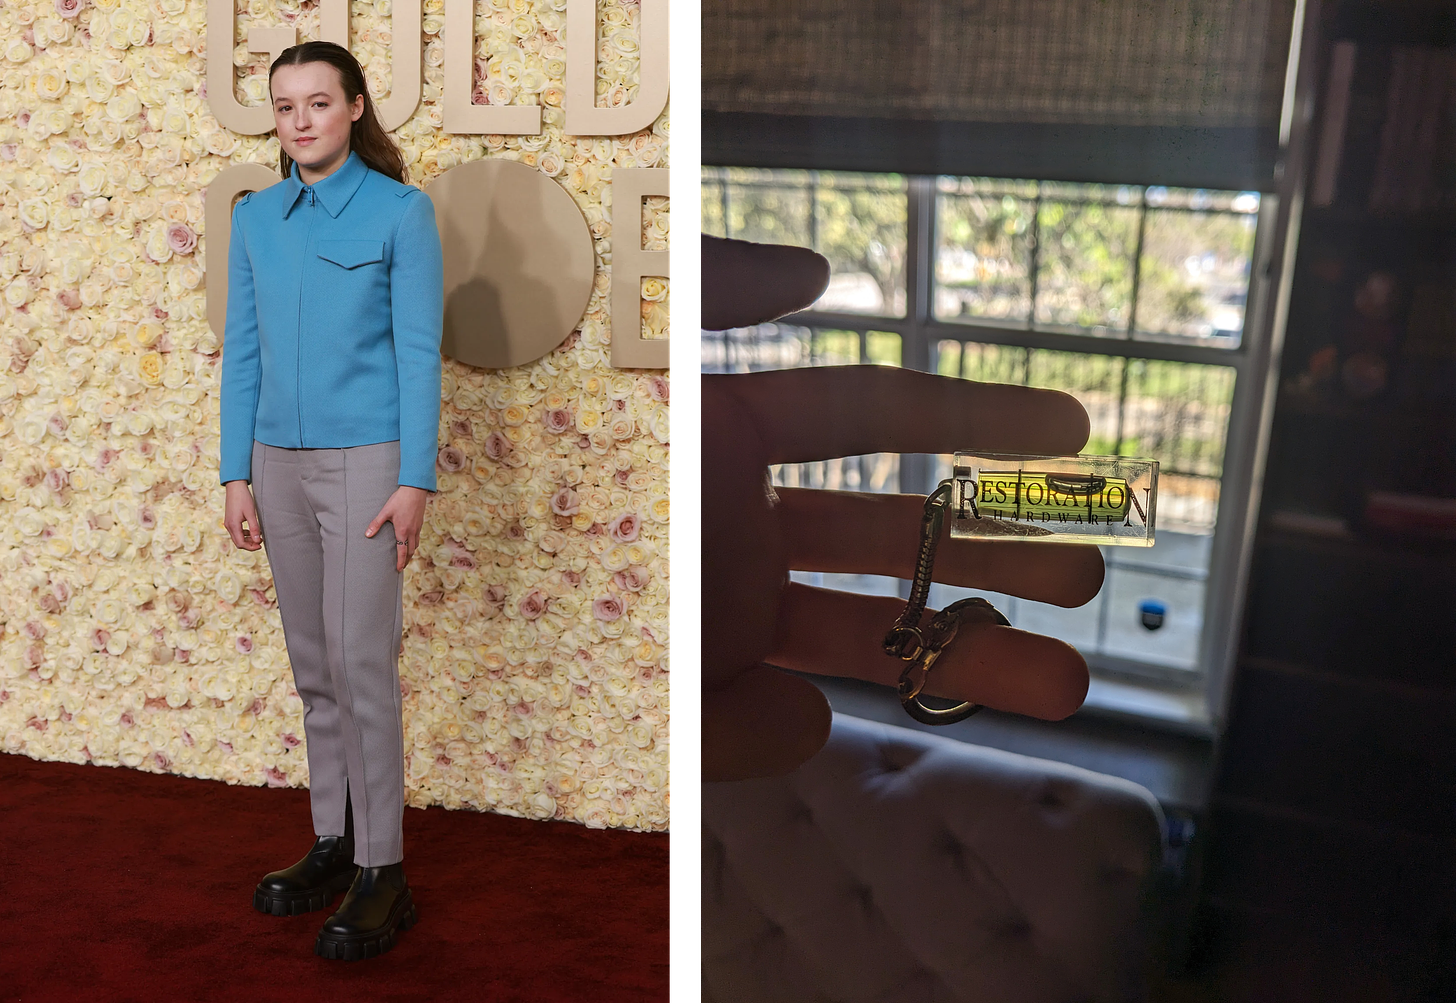 Left: Bella Ramsey in basically khakis and a blue uniform shirt. Right: A tiny level on a chain.